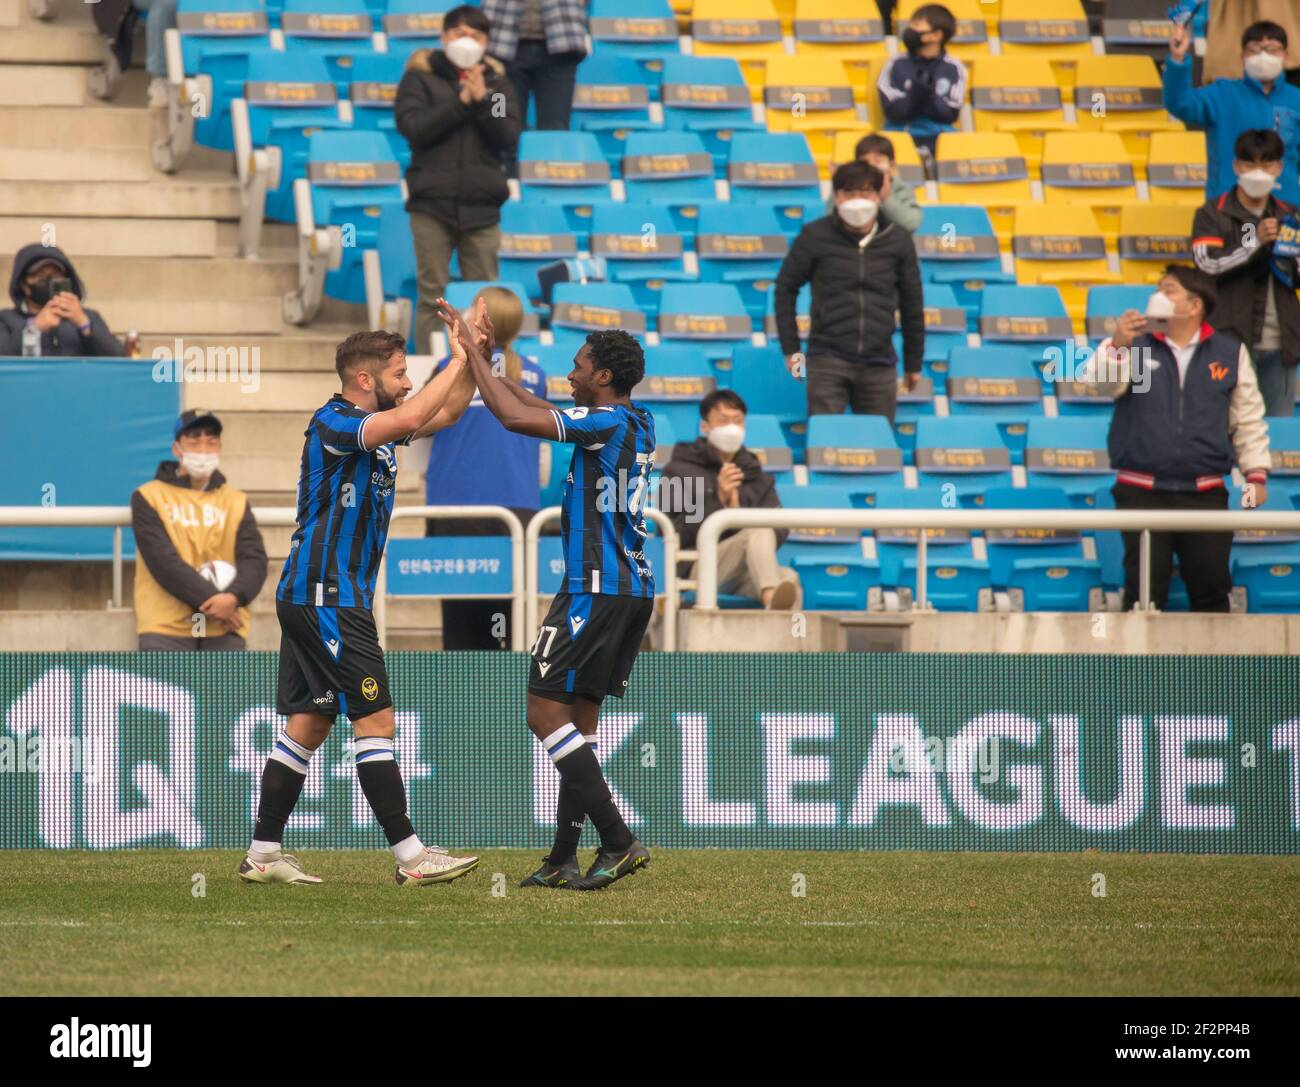 Incheon, South Korea. 06th Mar, 2021. Costa Rican midfielder Elias Aguilar (L) and Brazilian striker Guilherme Ferreira Pinto of Incheon United FC celebrate together after Elias Aguilar scored a goal during the 2nd round of the 2021 K League 1 soccer match between Incheon United FC and Daegu FC at the Incheon Football Stadium.(Final score; Incheon United FC 2:1 Daegu FC) Credit: SOPA Images Limited/Alamy Live News Stock Photo